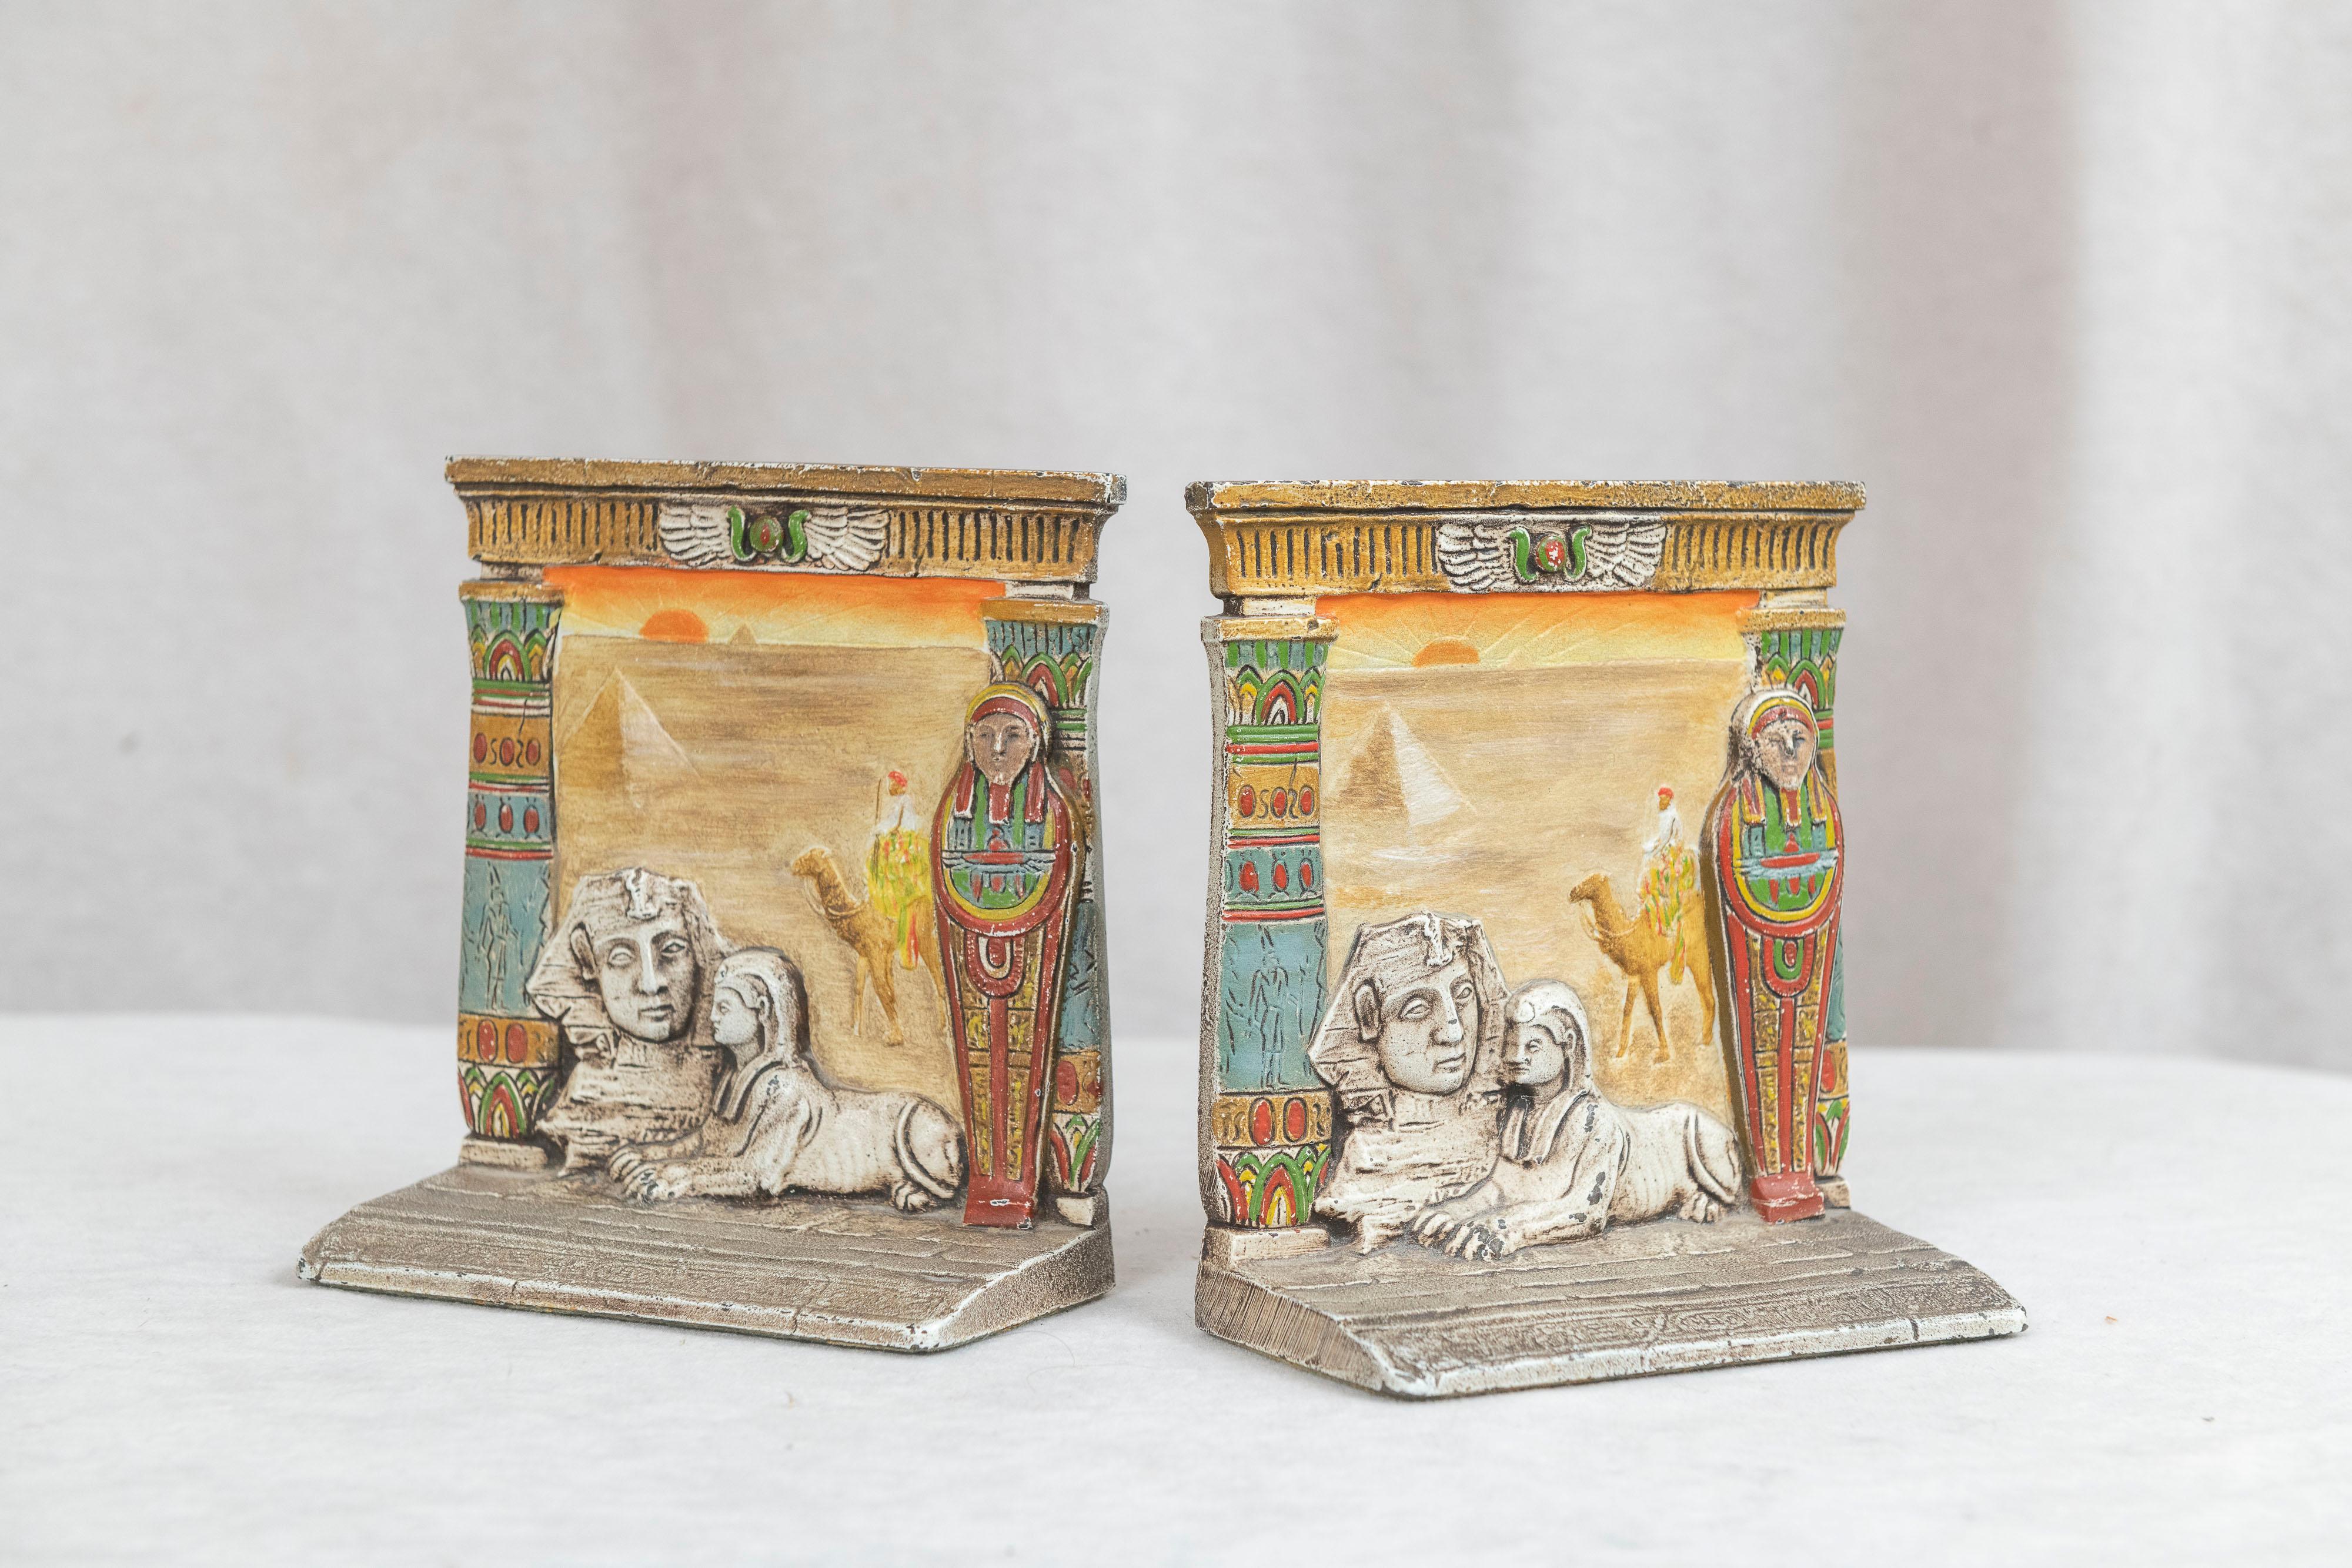 These highly detailed colorful bookends were done by the best creator of bookends, the Judd Co. With the Egyptian theme and done in bas relief you get a wonderful story told. Sphinx, Sarcophagus, Camel, Scarab, it's all there. Made from cast iron